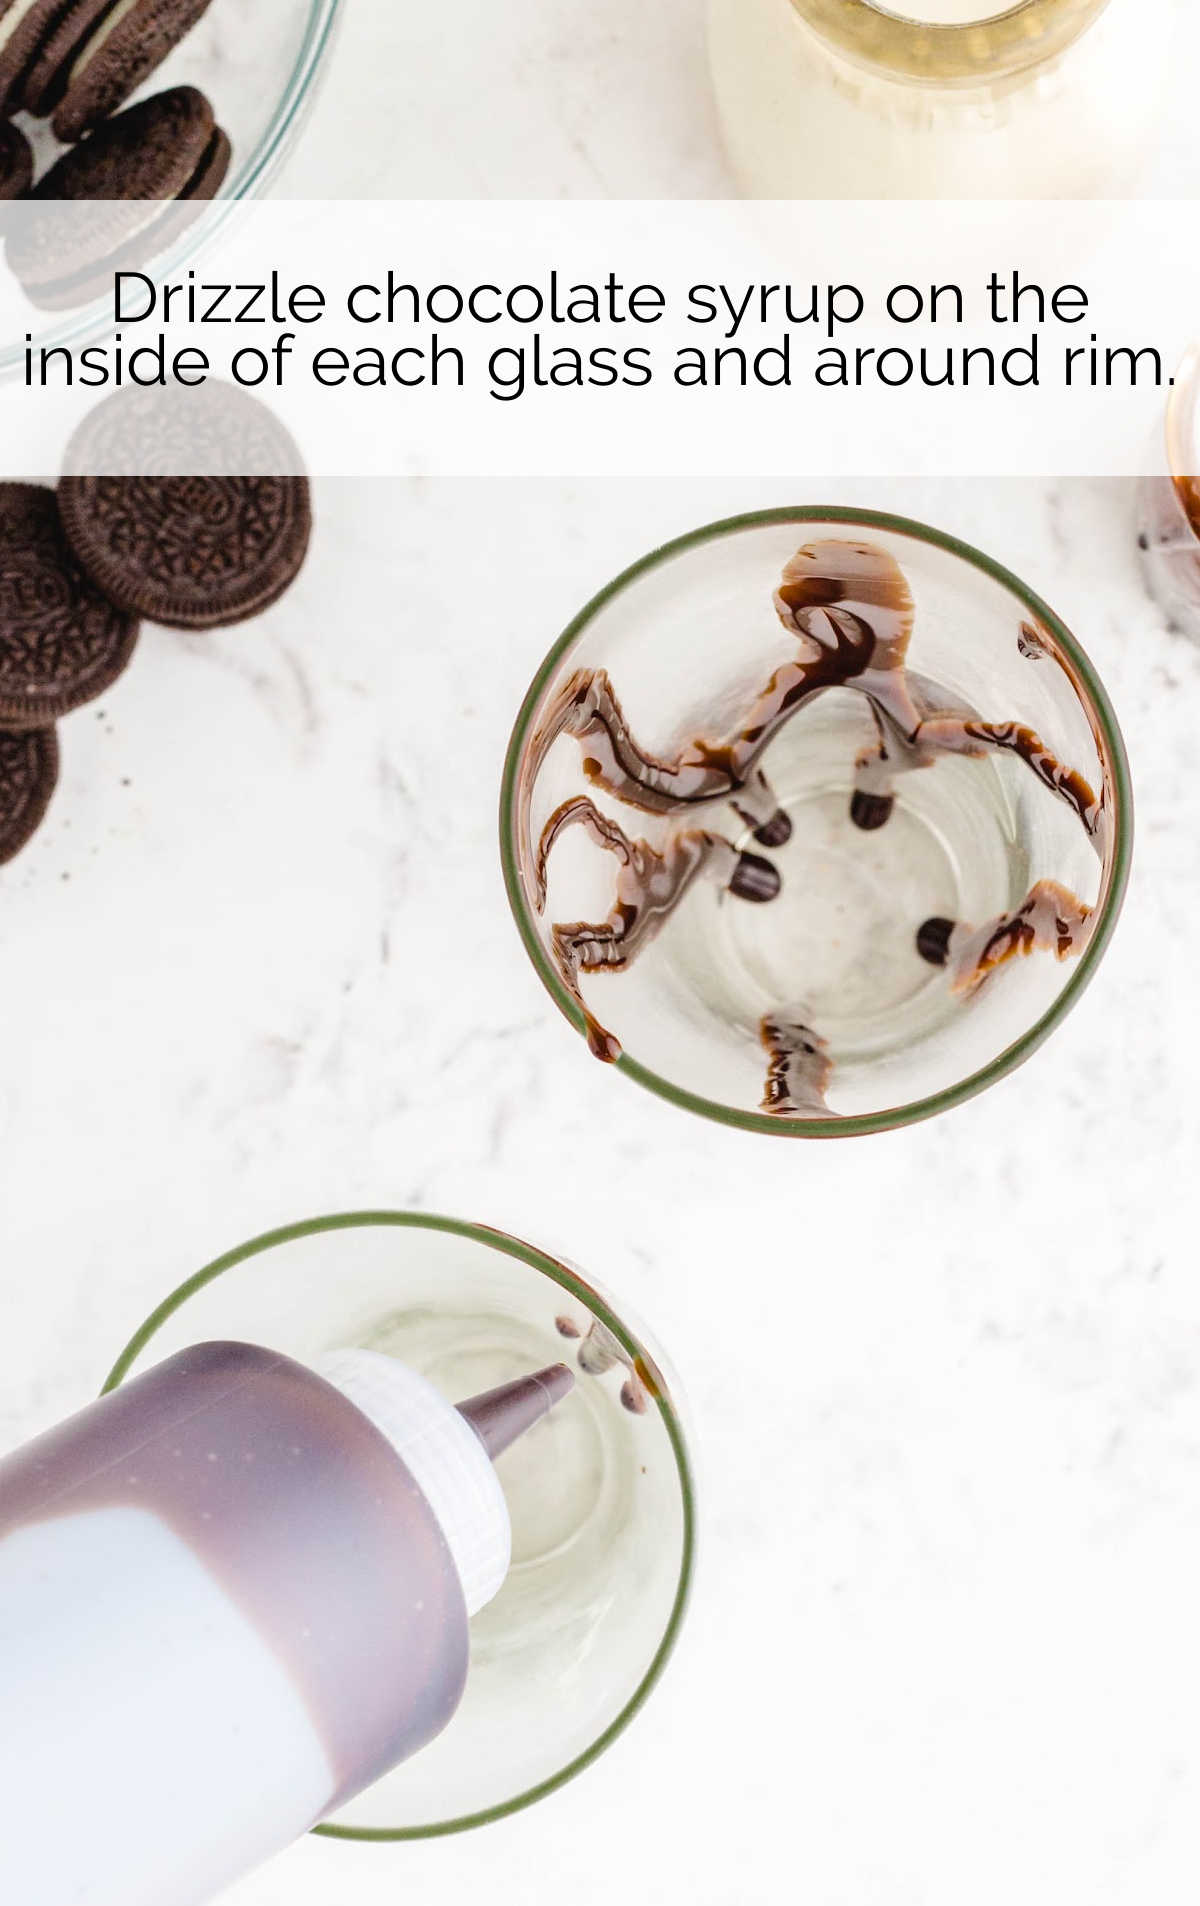 chocolate syrup drizzled on the rim of the glass